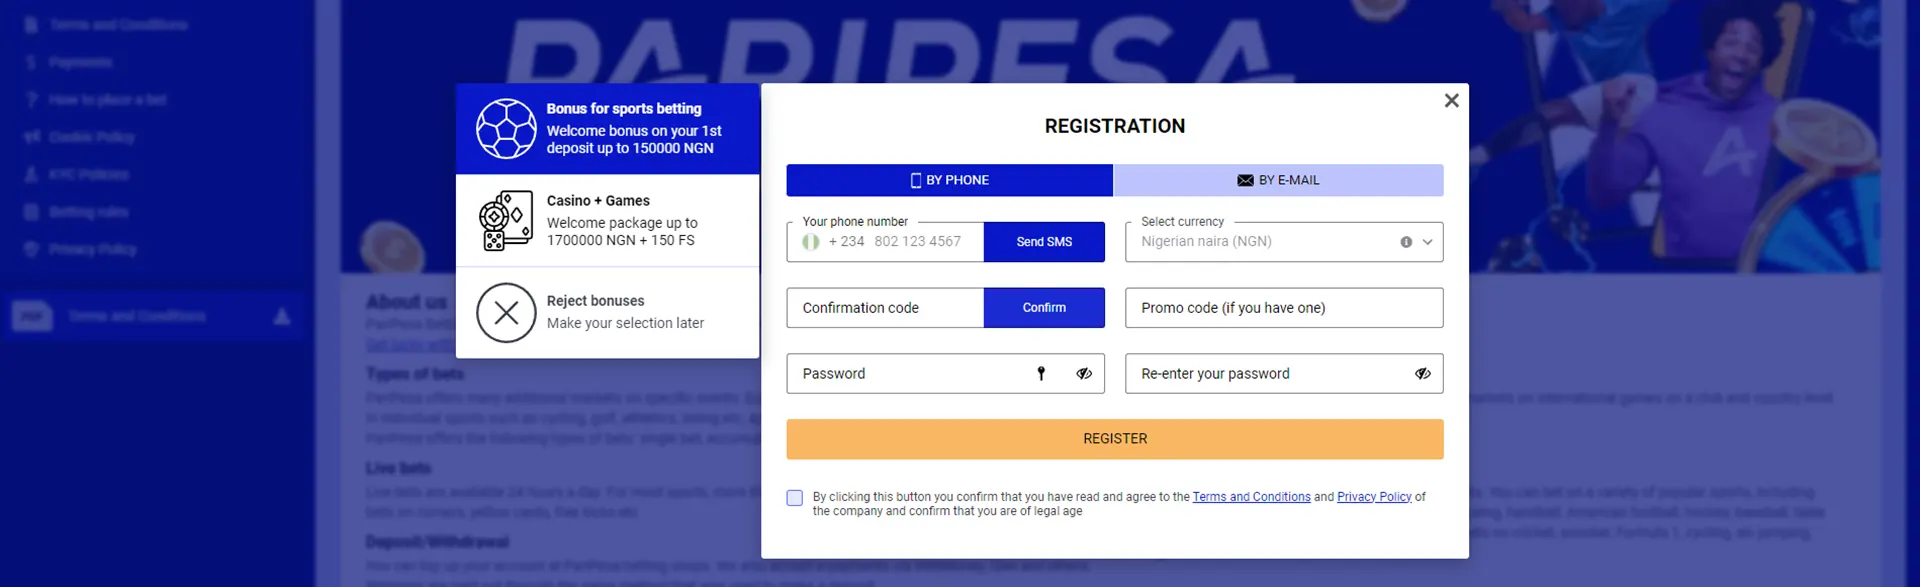 Page with registration form by phone or email on PariPesa.